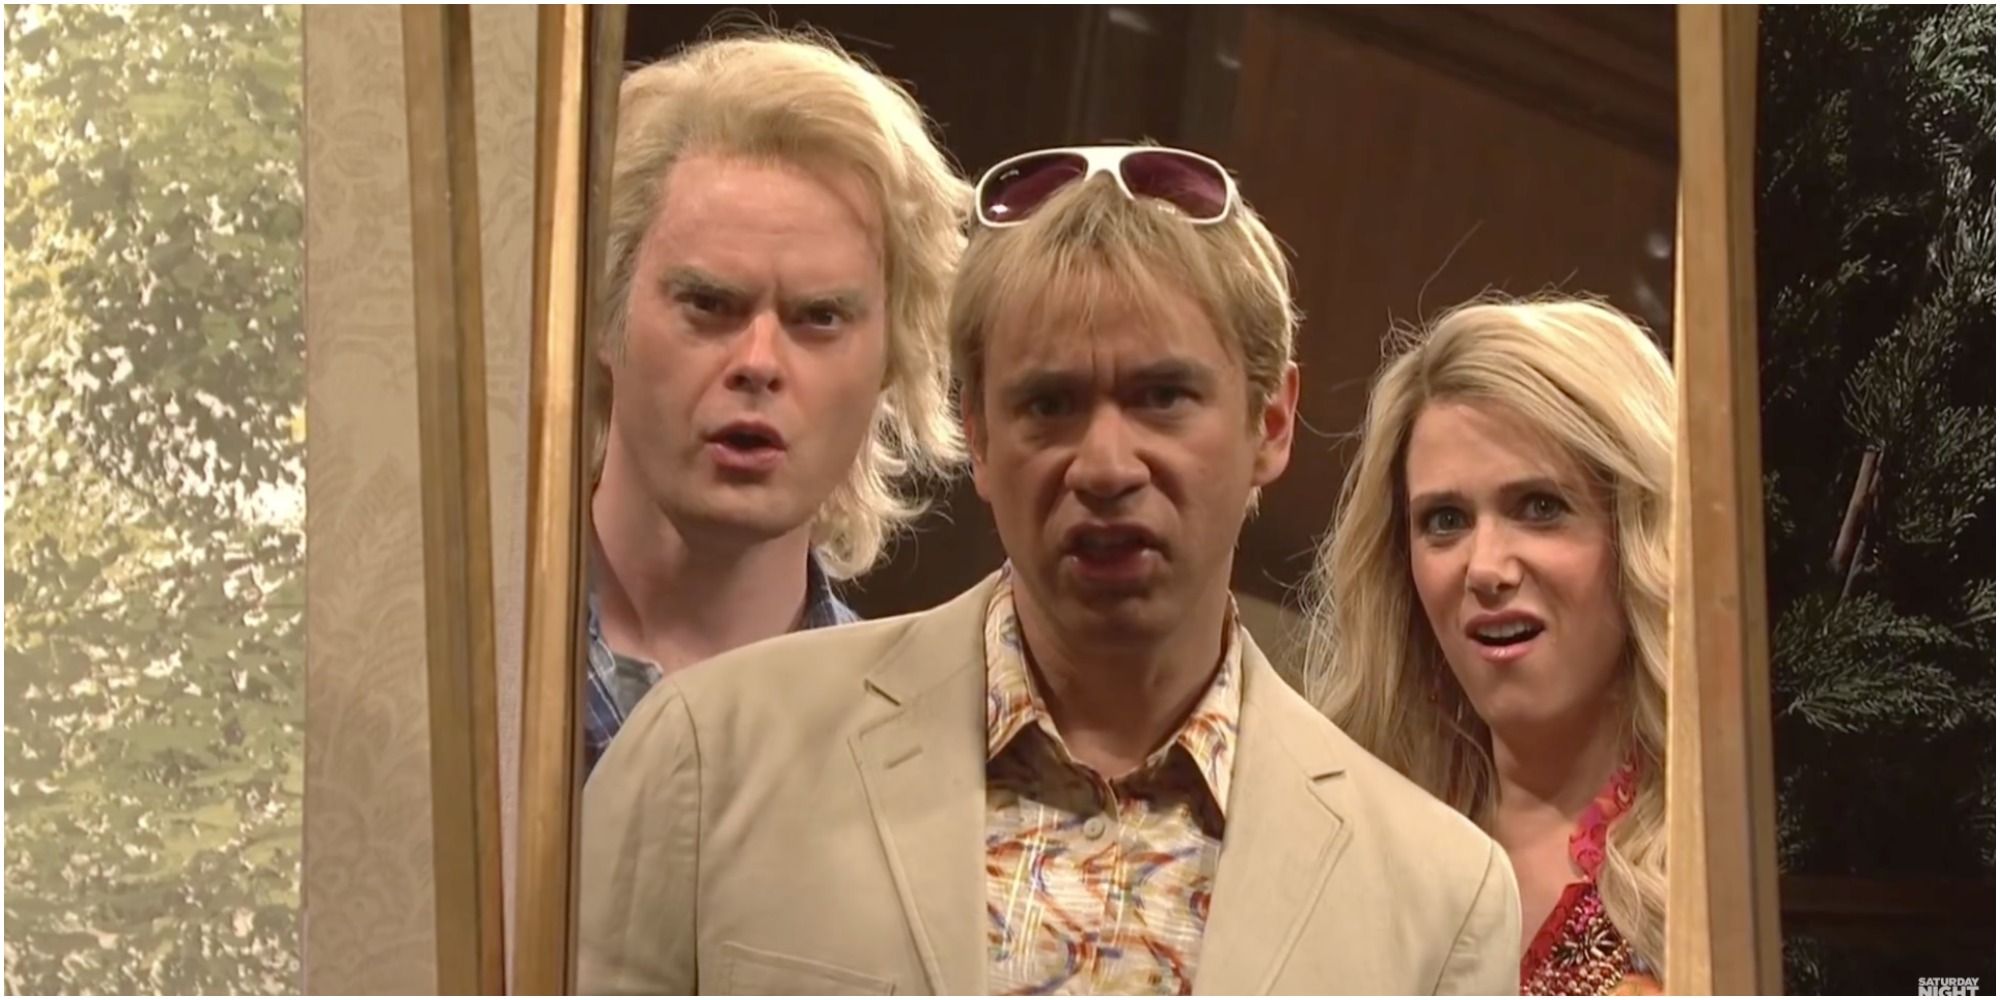 A screenshot of Bill Hader, Fred Armisen and Kristen Wiig in &quot;The Californians&quot; sketch from SNL